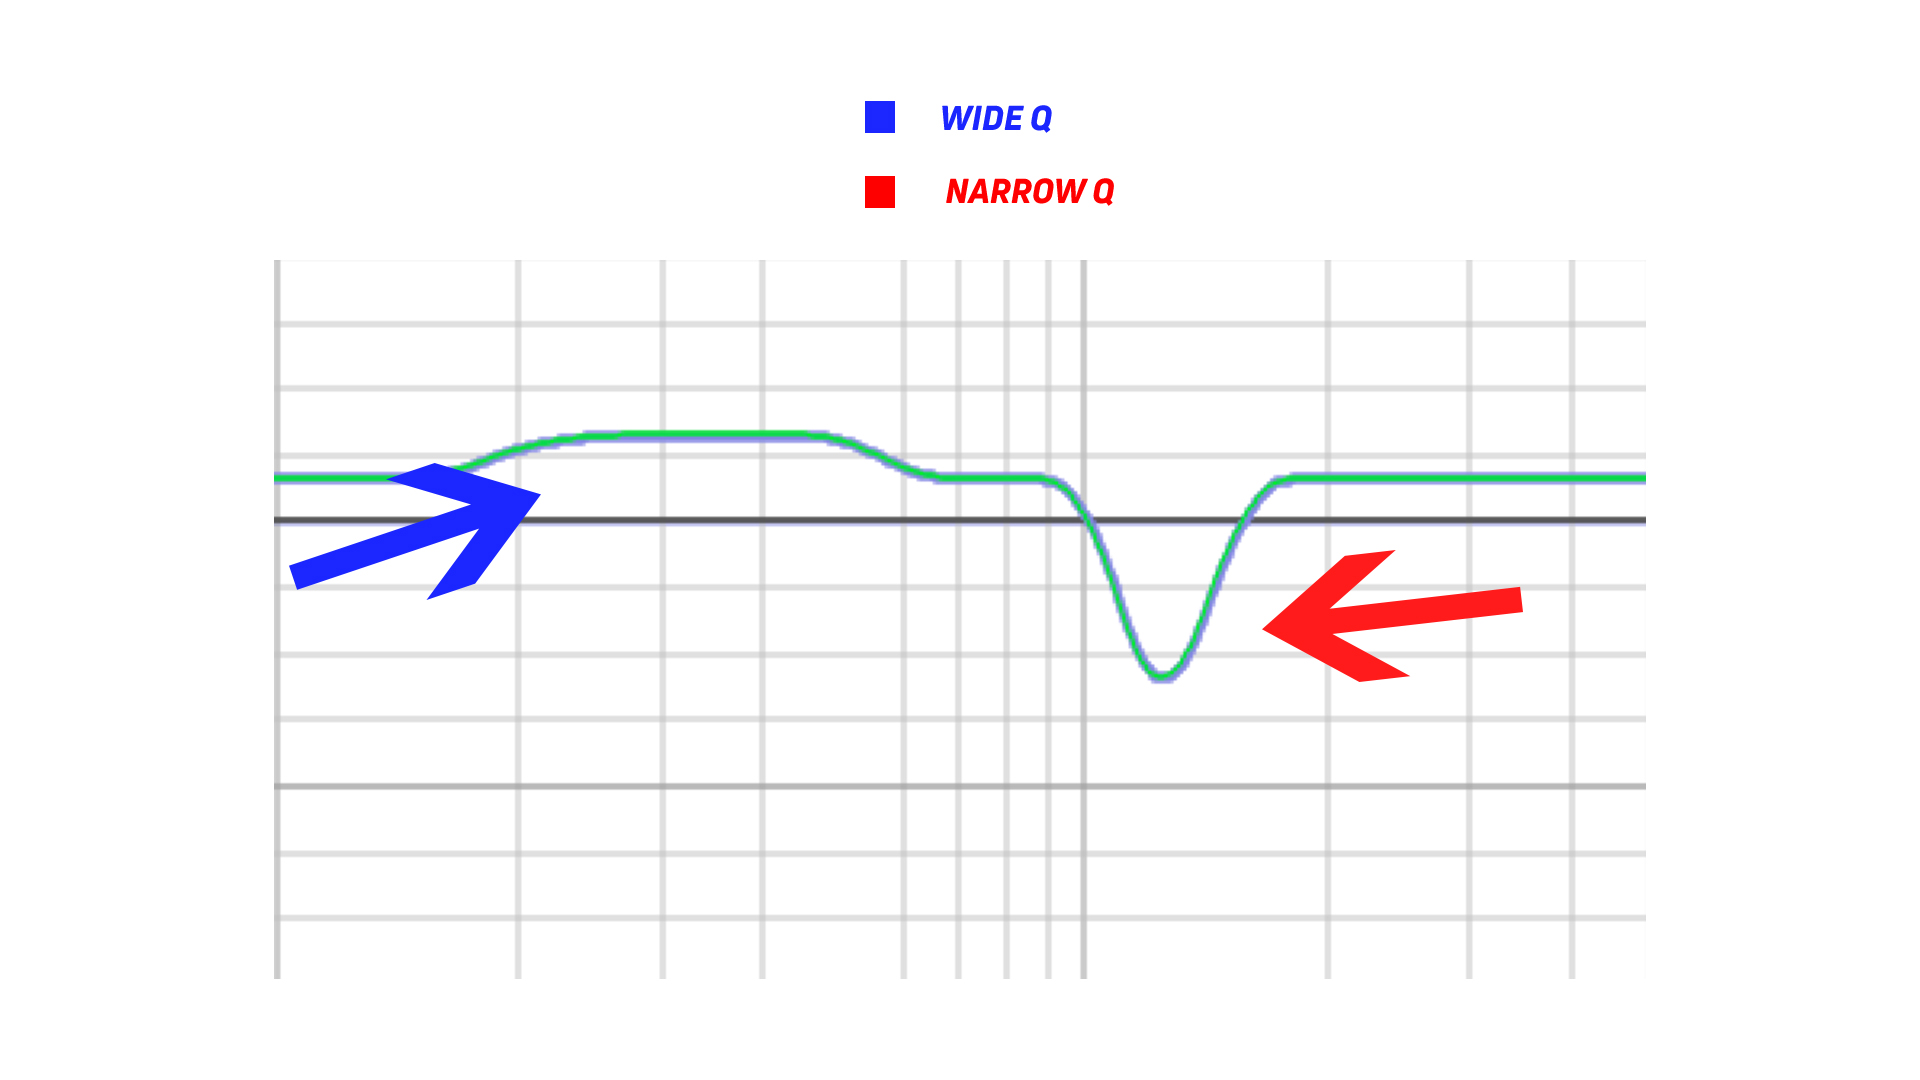 A graph of a wide flat plateau area indicating a wide Q equalizer adjustment, indicated by a blue arrow, and a steep, peaked valley equalizer adjustment, indicating a narrow Q.